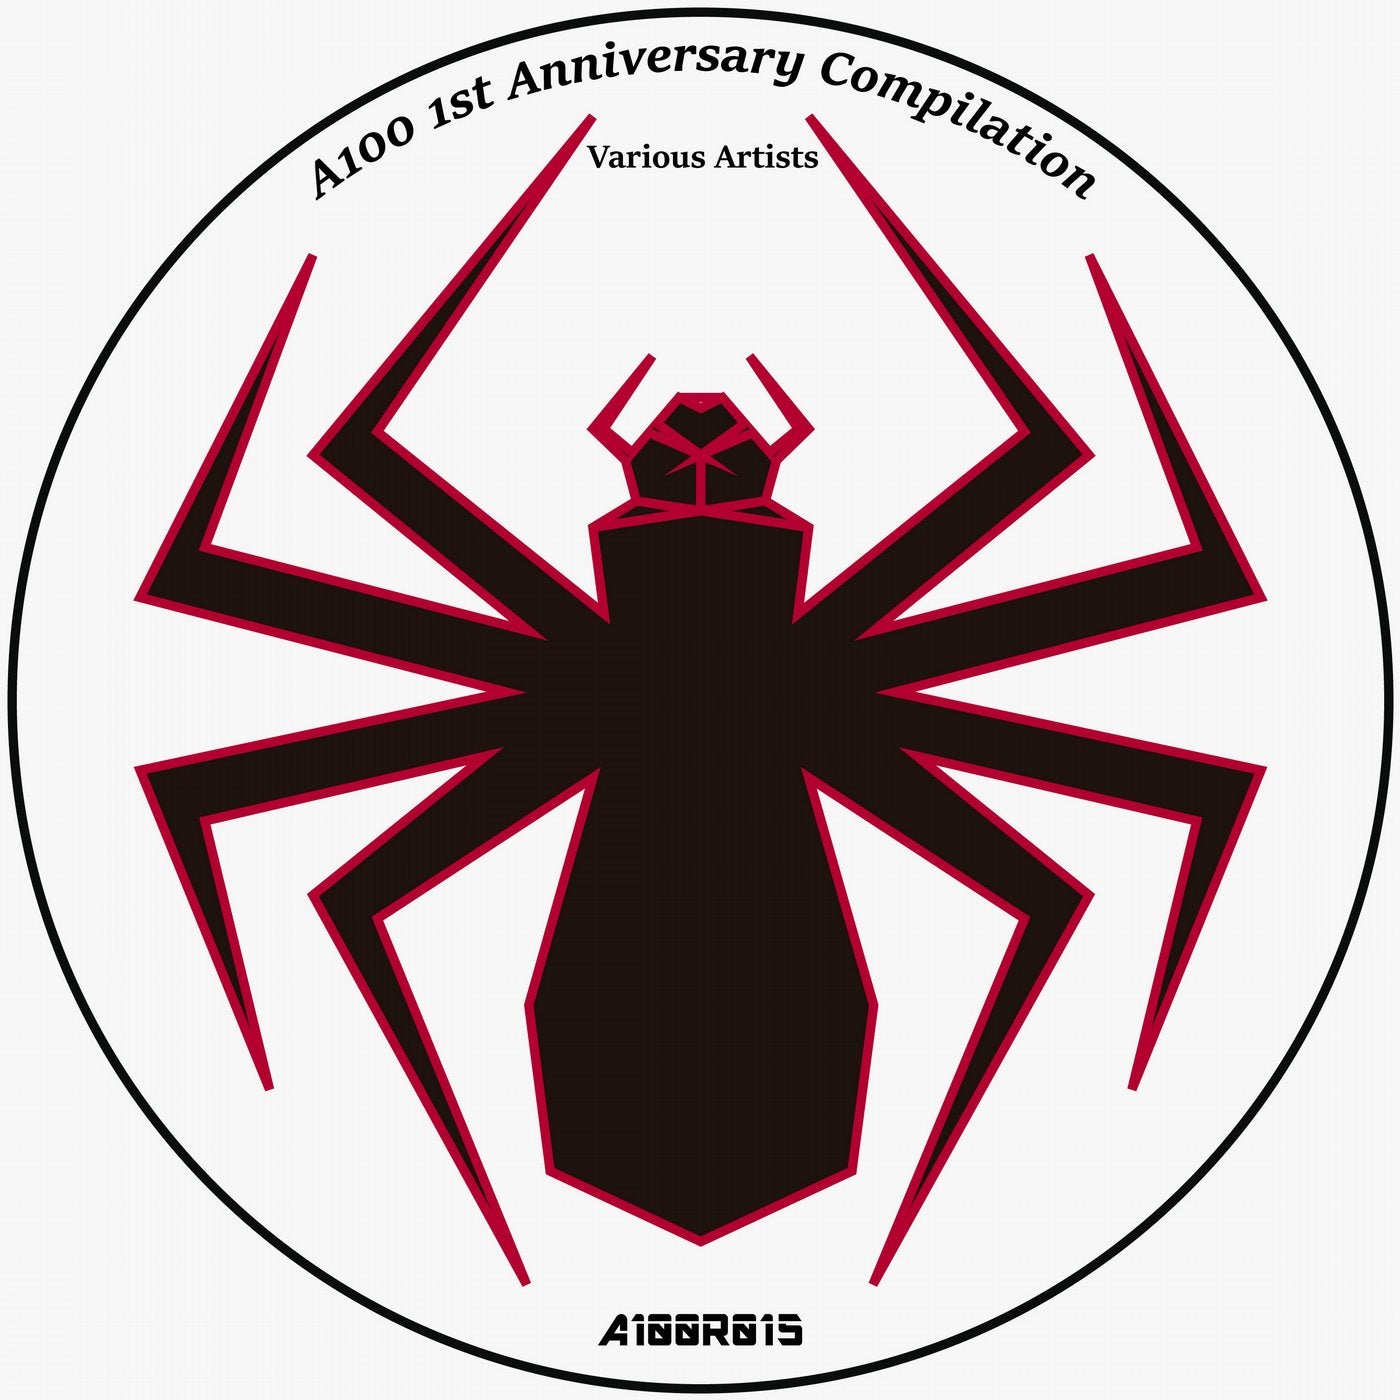 A100 1st Anniversary Compilation